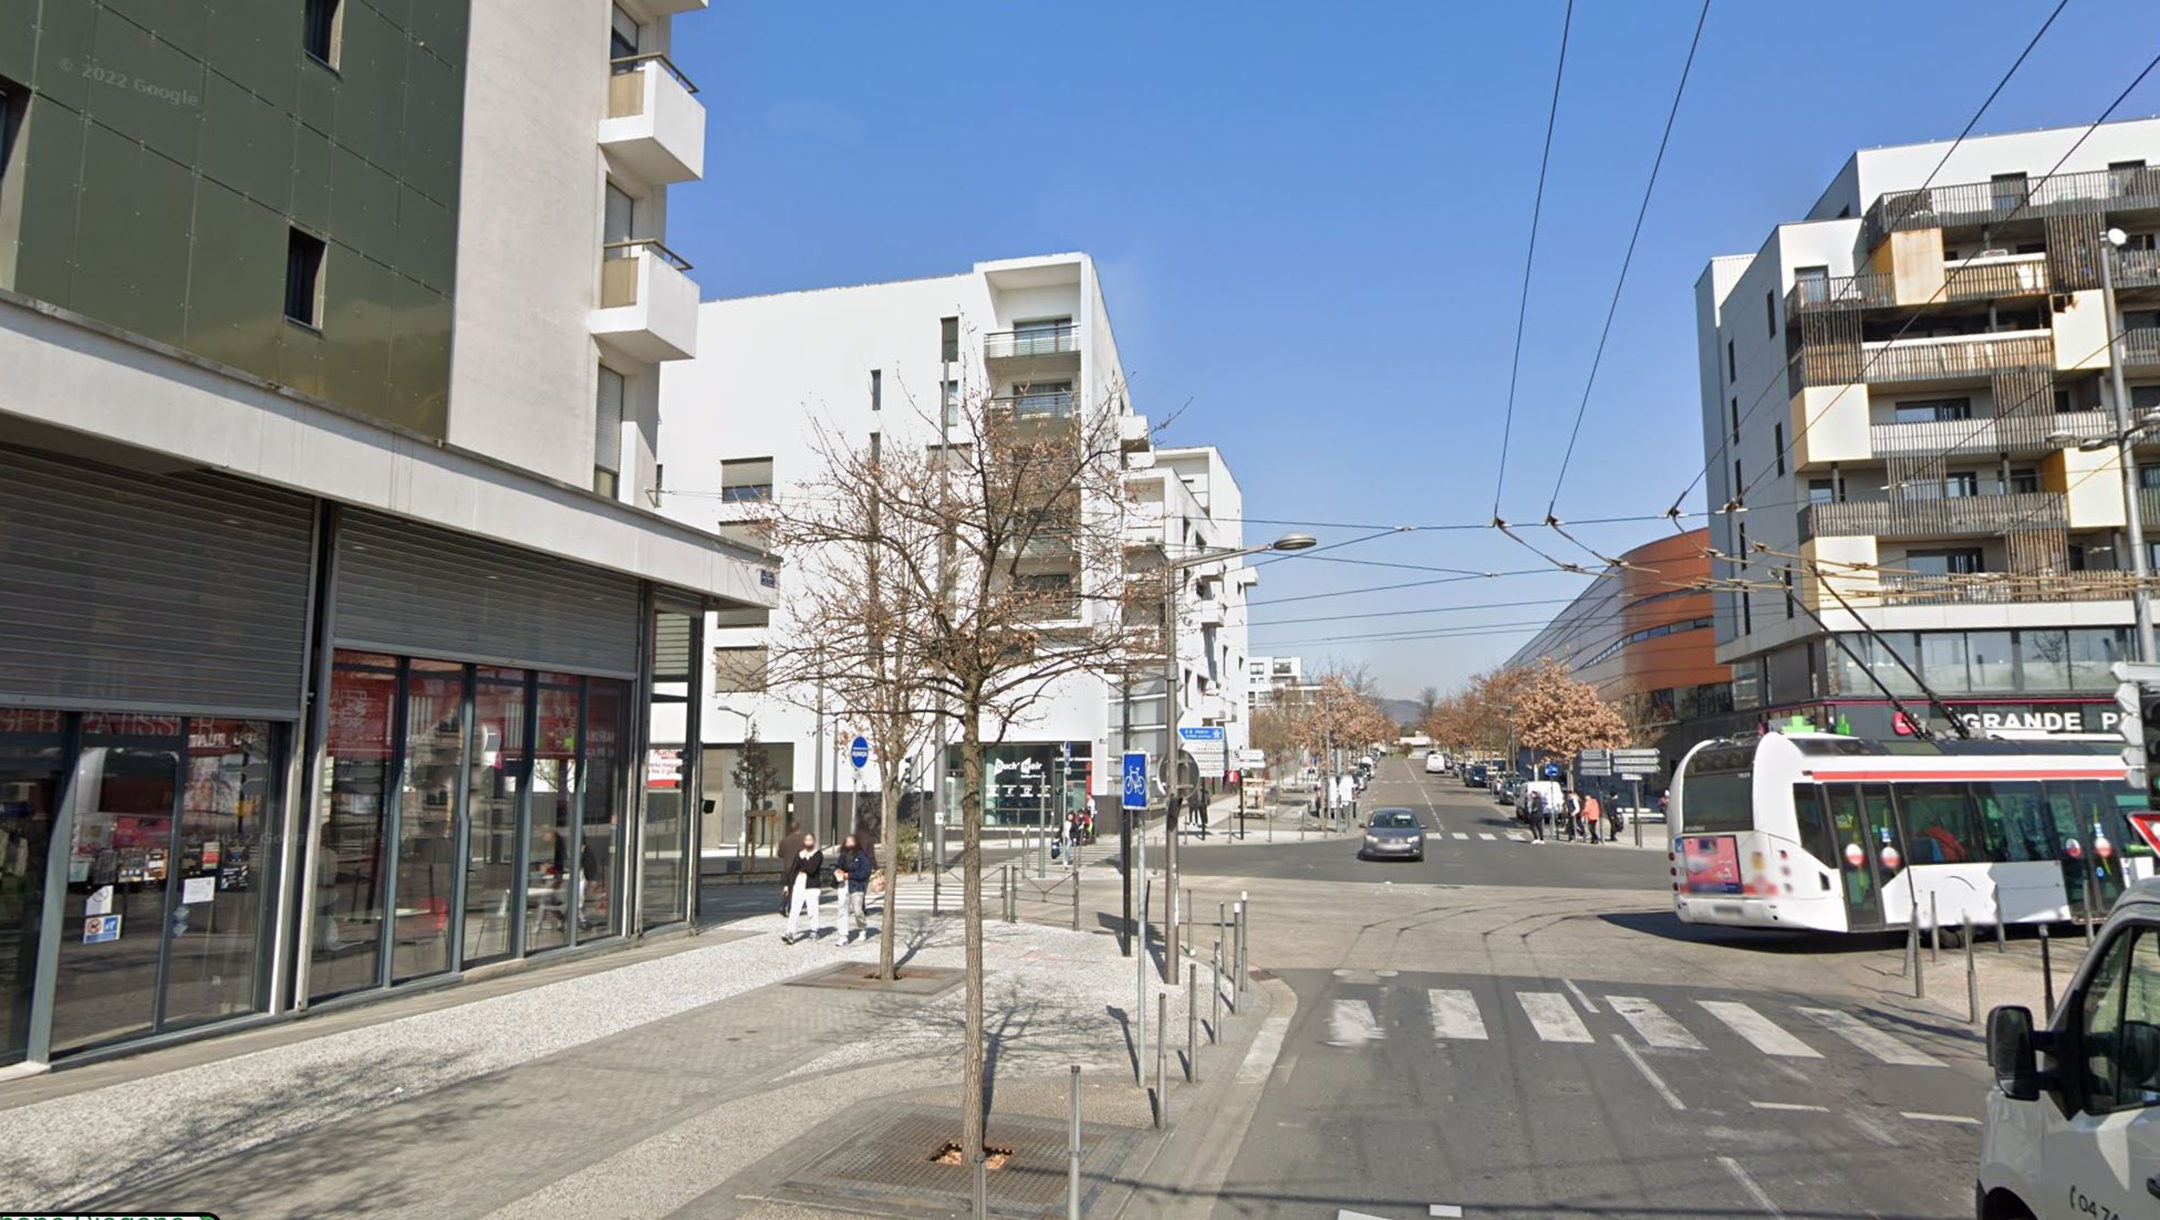 A tram turns on Plateau Avenue in Lyon, France, March 2022. Police said that a Jewish 90-year-old man was pushed to his death from the balcony of a building on the street by one of his neighbors on May 17, 2022. (Google Maps)one of his neighbors on May 17, 2022. (Google Maps)